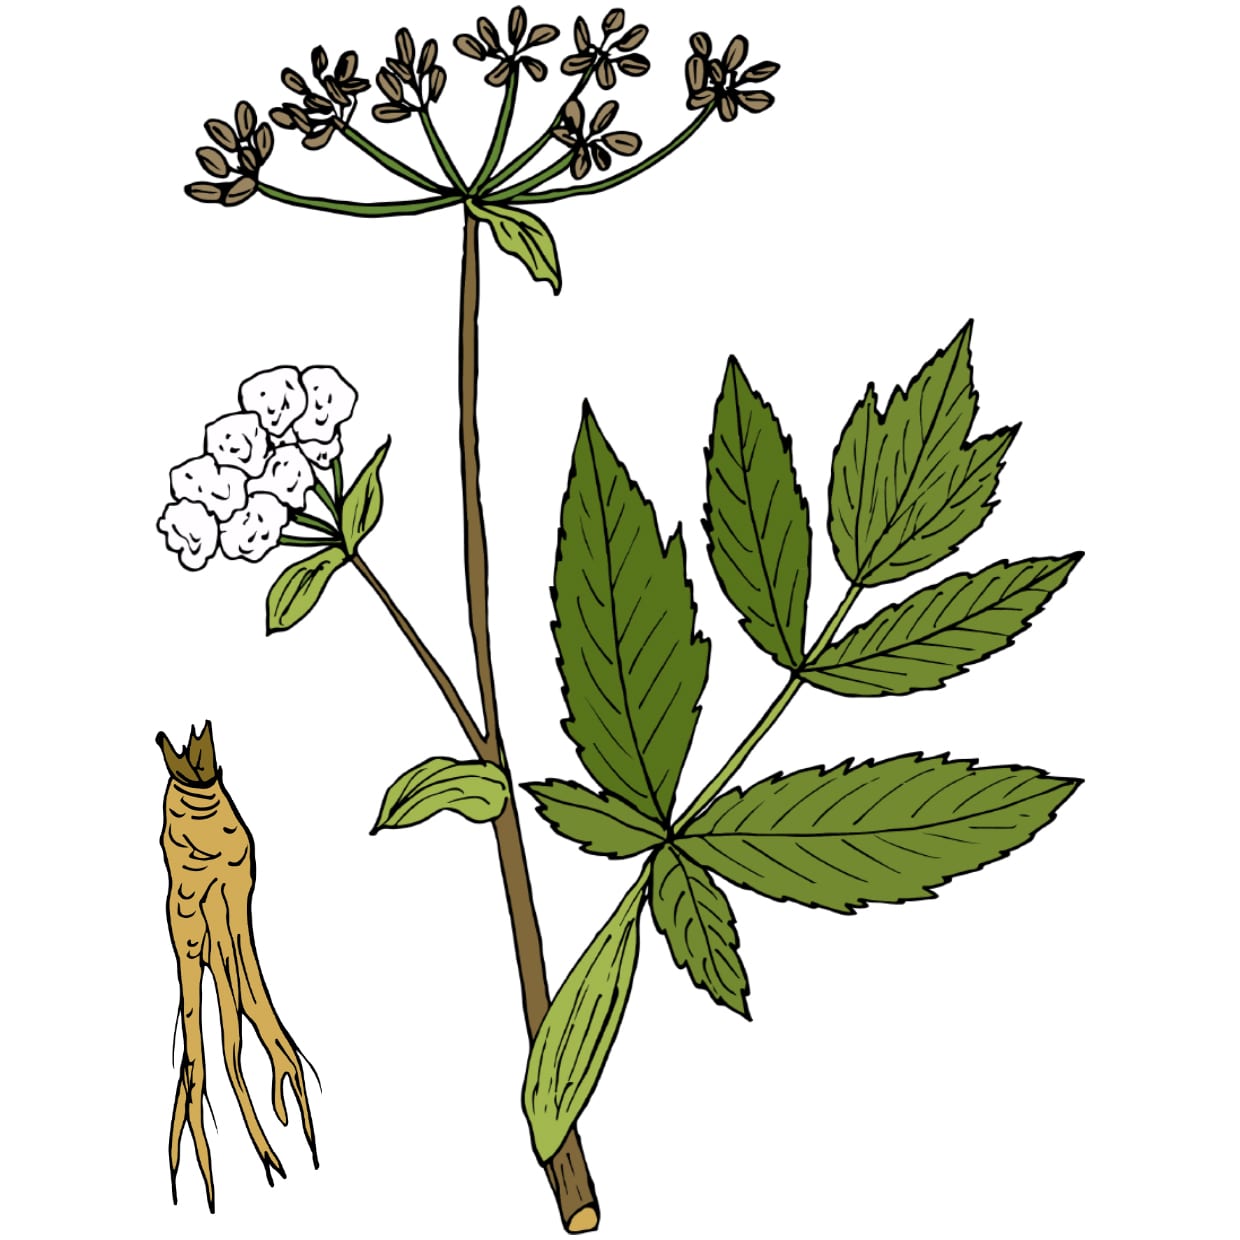 An illustration of a Chinese angelica plant.